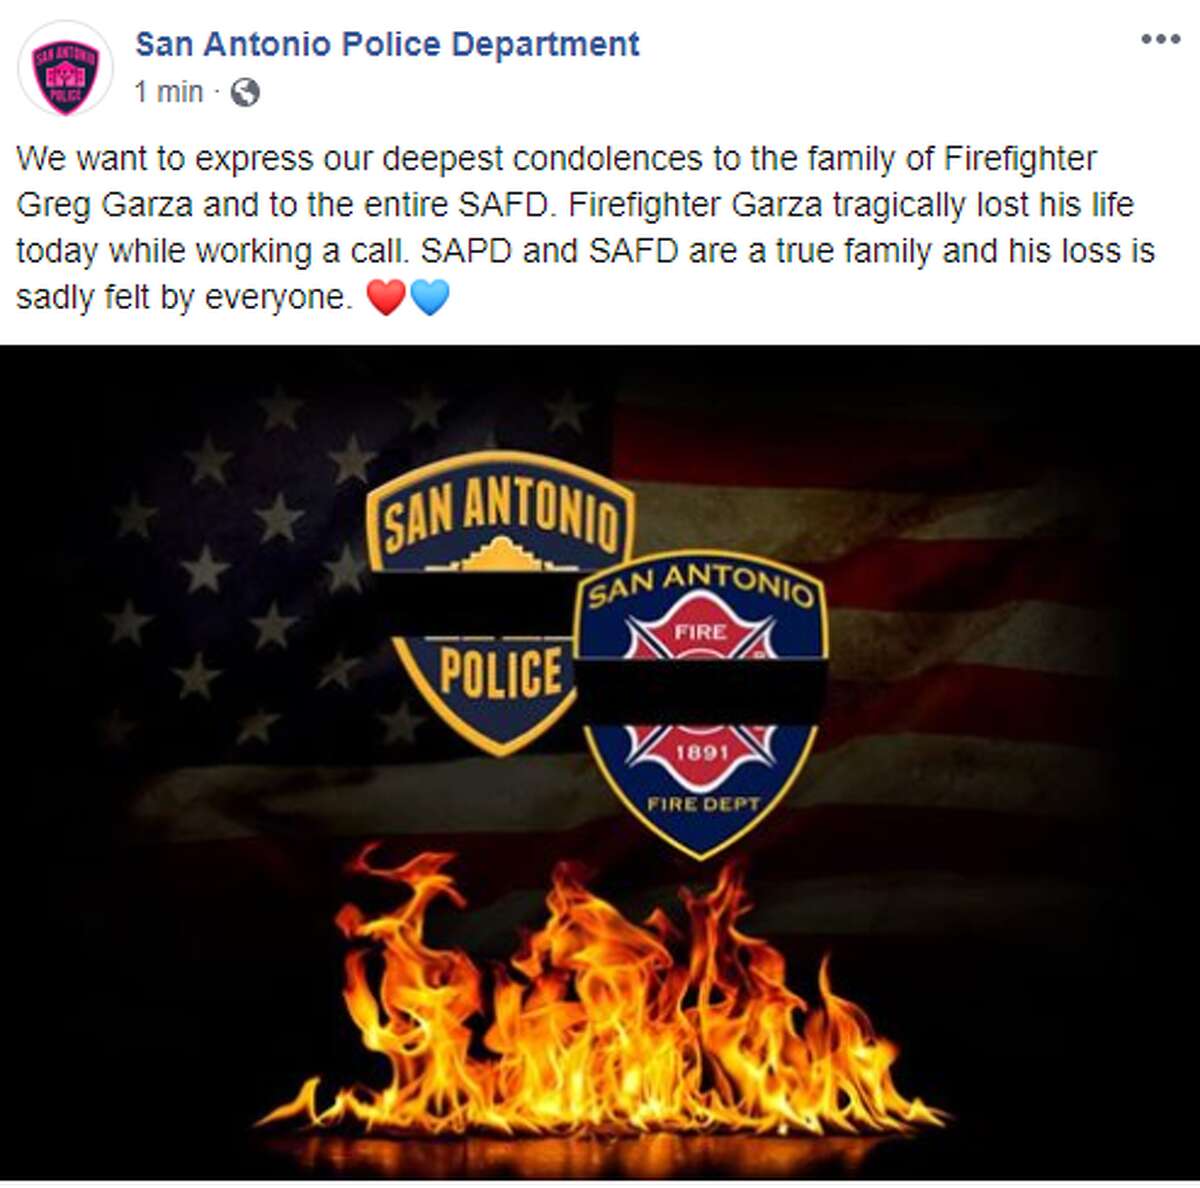 San Antonio Police Department: We want to express our deepest condolences to the family of Firefighter Greg Garza and to the entire SAFD. Firefighter Garza tragically lost his life today while working a call. SAPD and SAFD are a true family and his loss is sadly felt by everyone